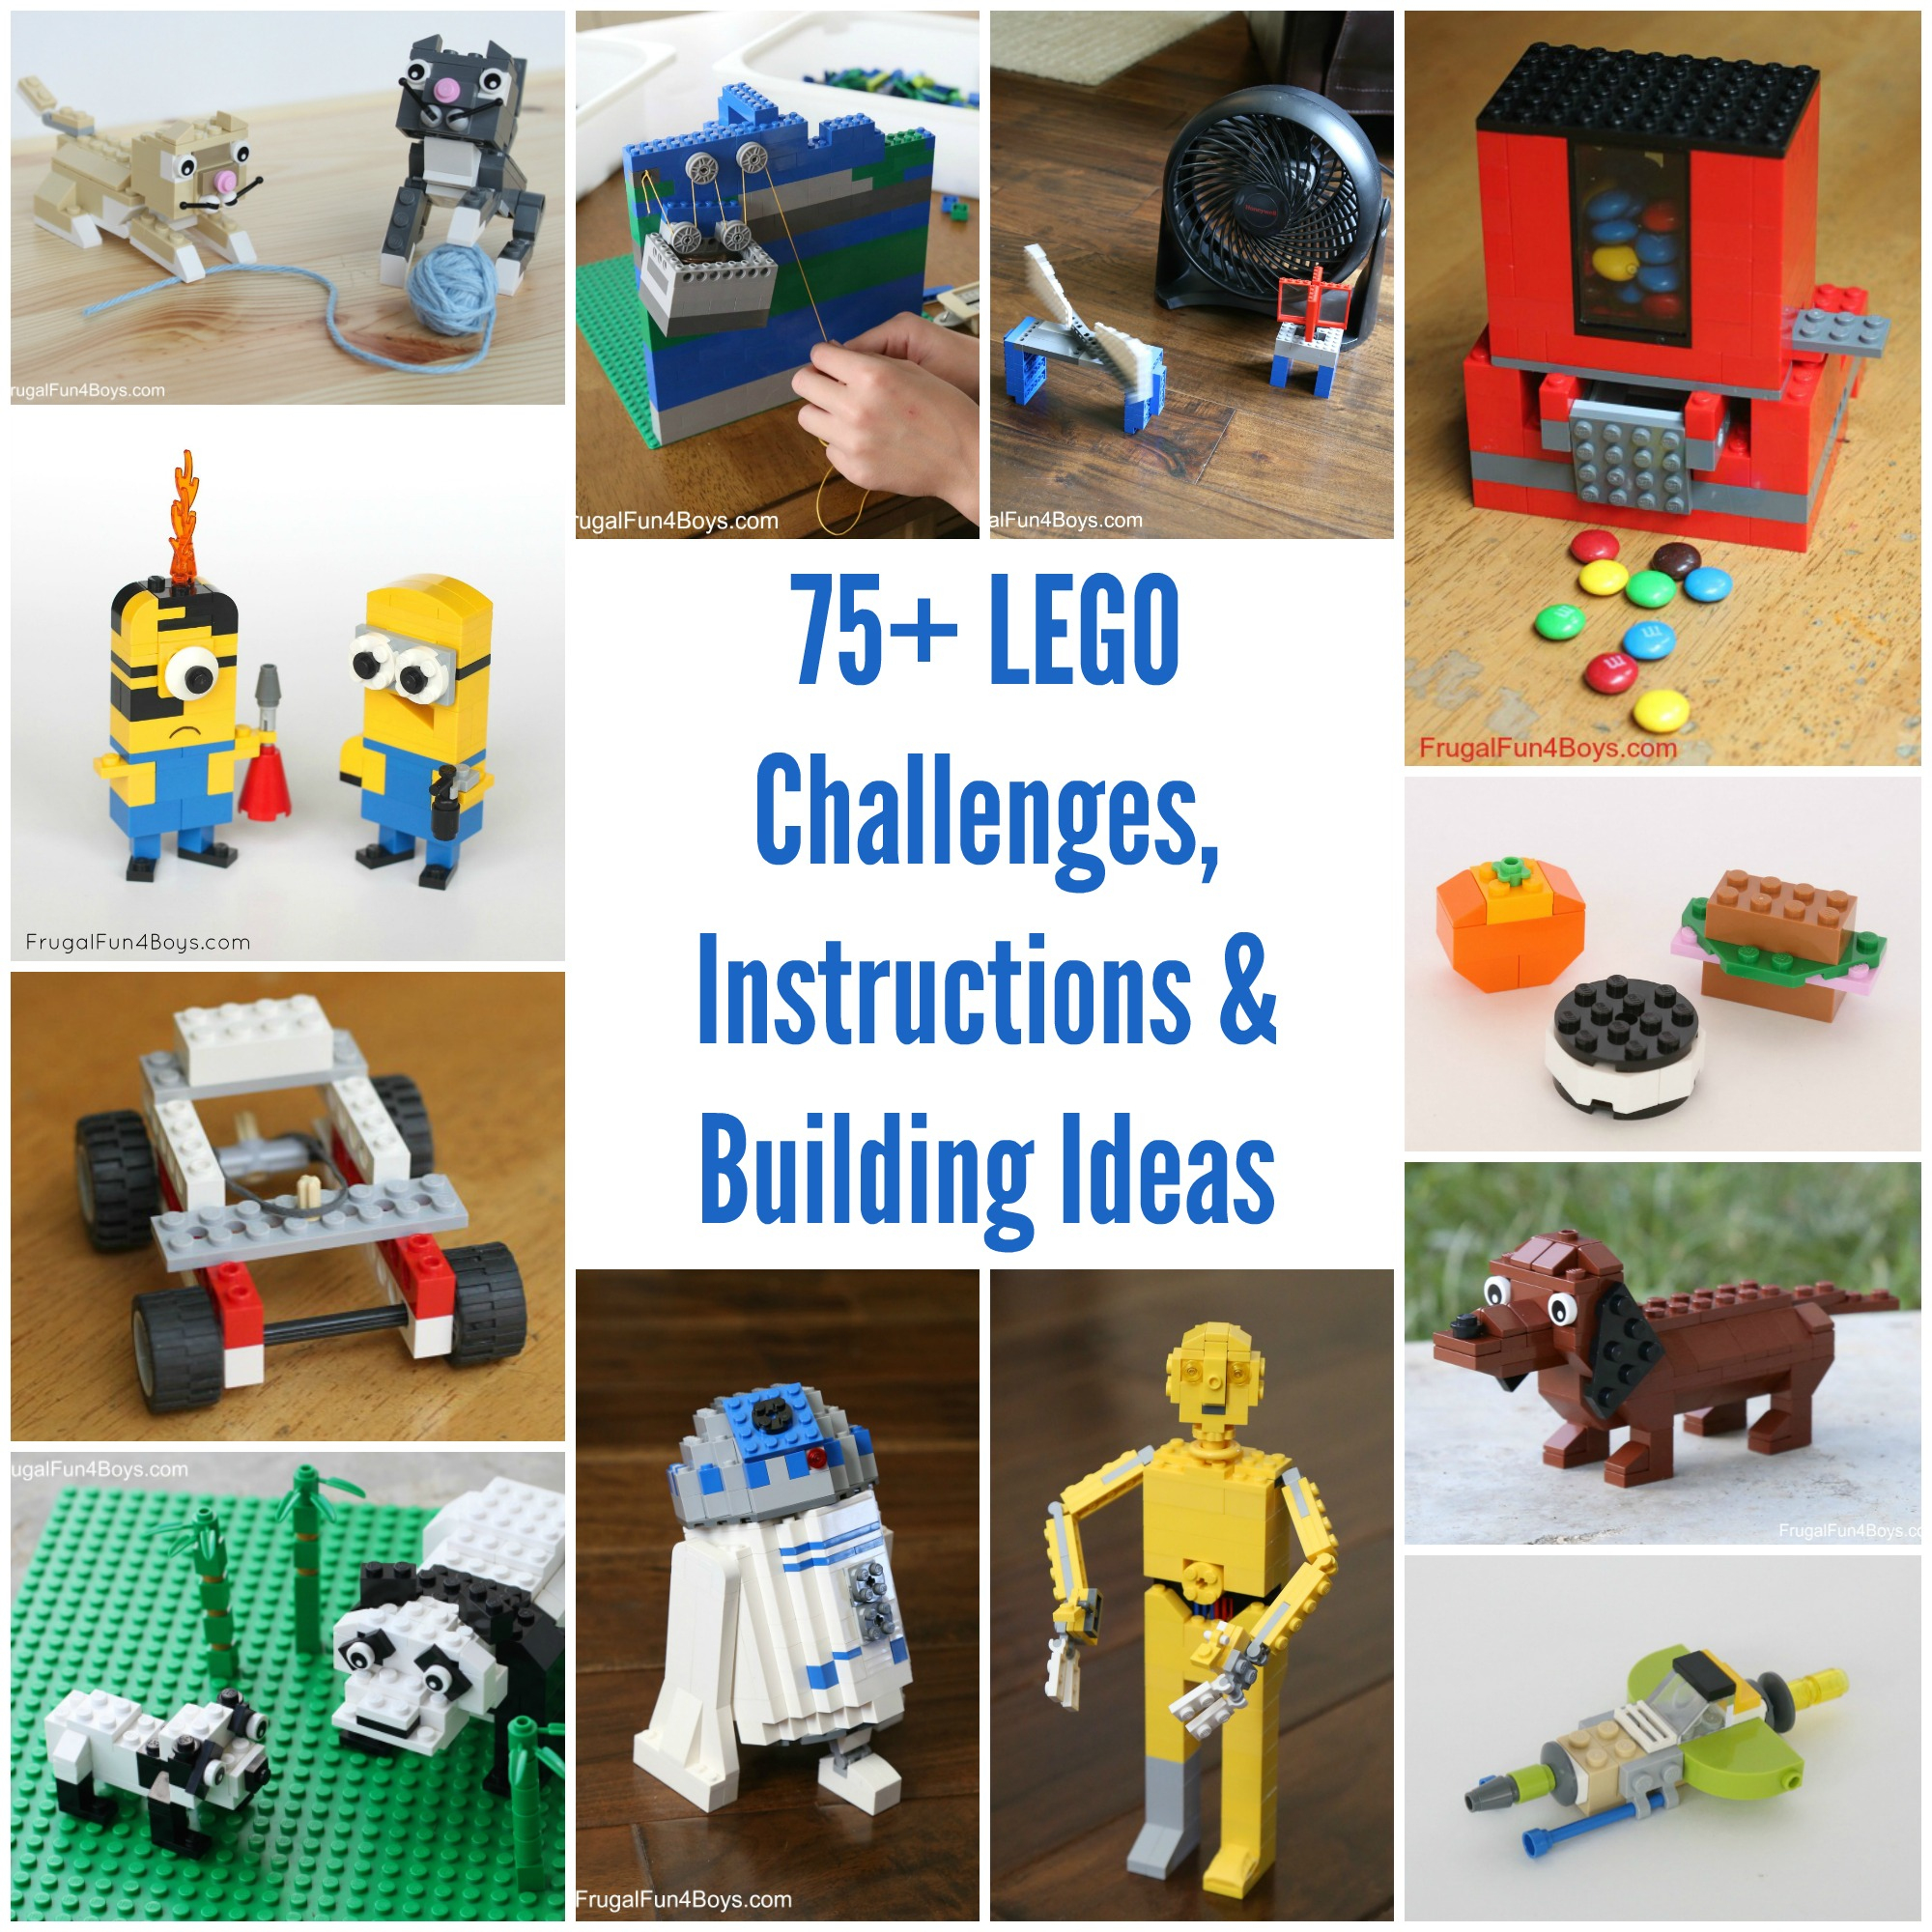 50+ Lego Building Projects For Kids - Frugal Fun For Boys And Girls - Free Printable Lego Instructions